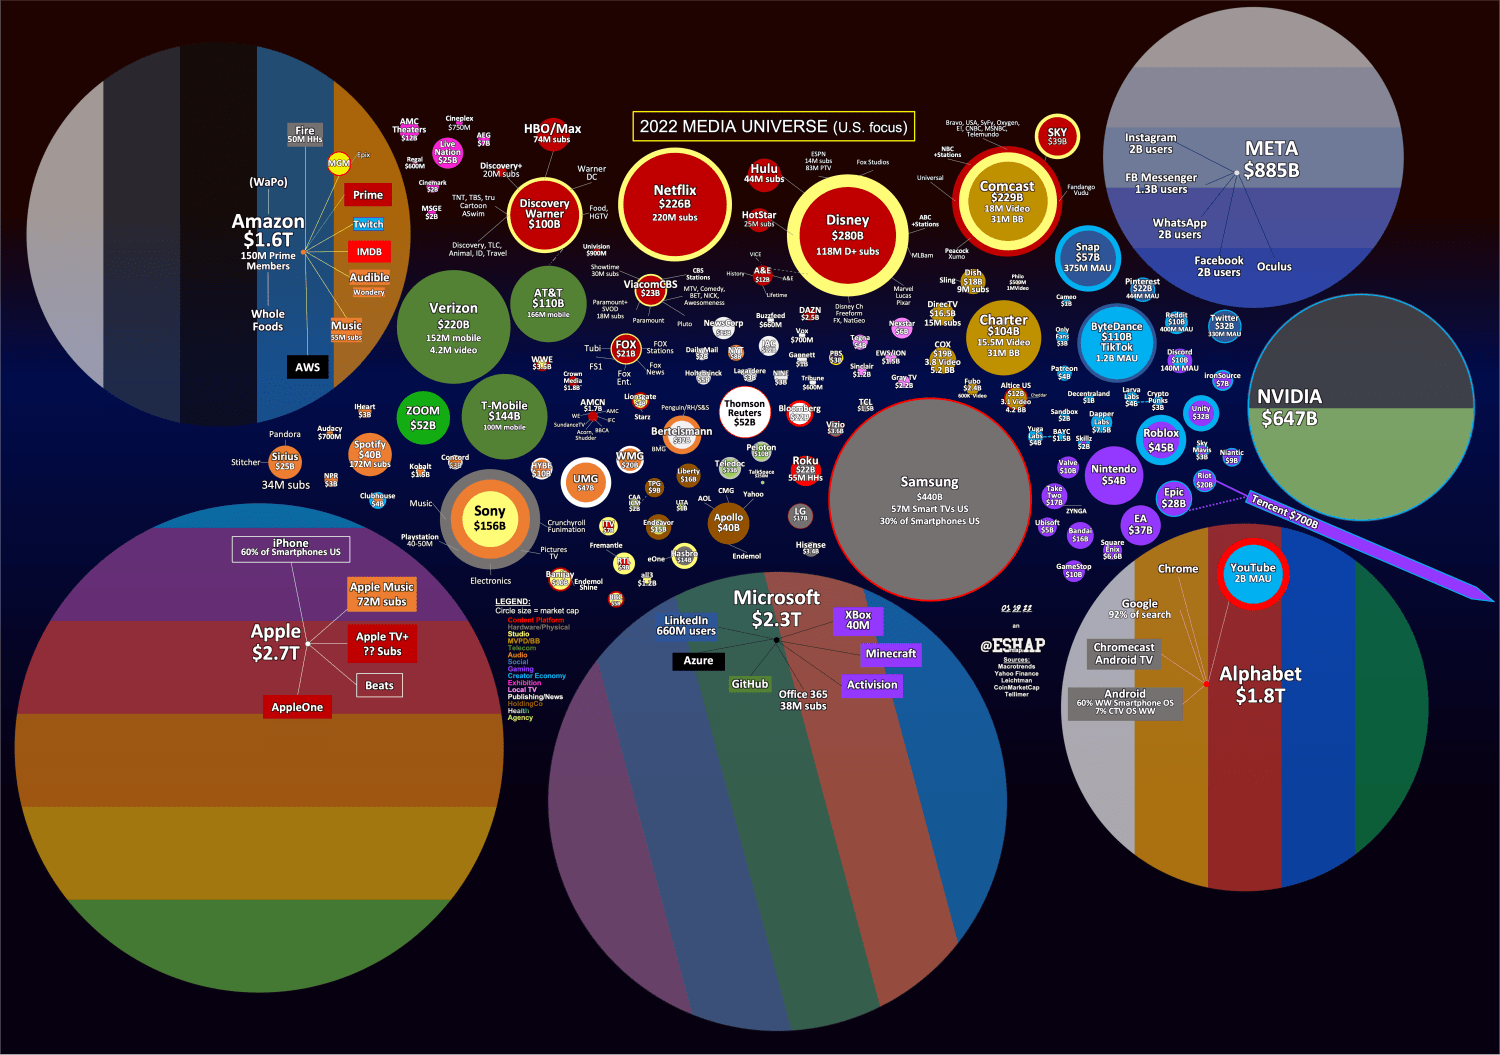 New Media Universe Map w Microsoft/Activision deal includedSources Yahoo Finance, Tellimer, Macrotrends, CoinMarketCap - made in powerpoint